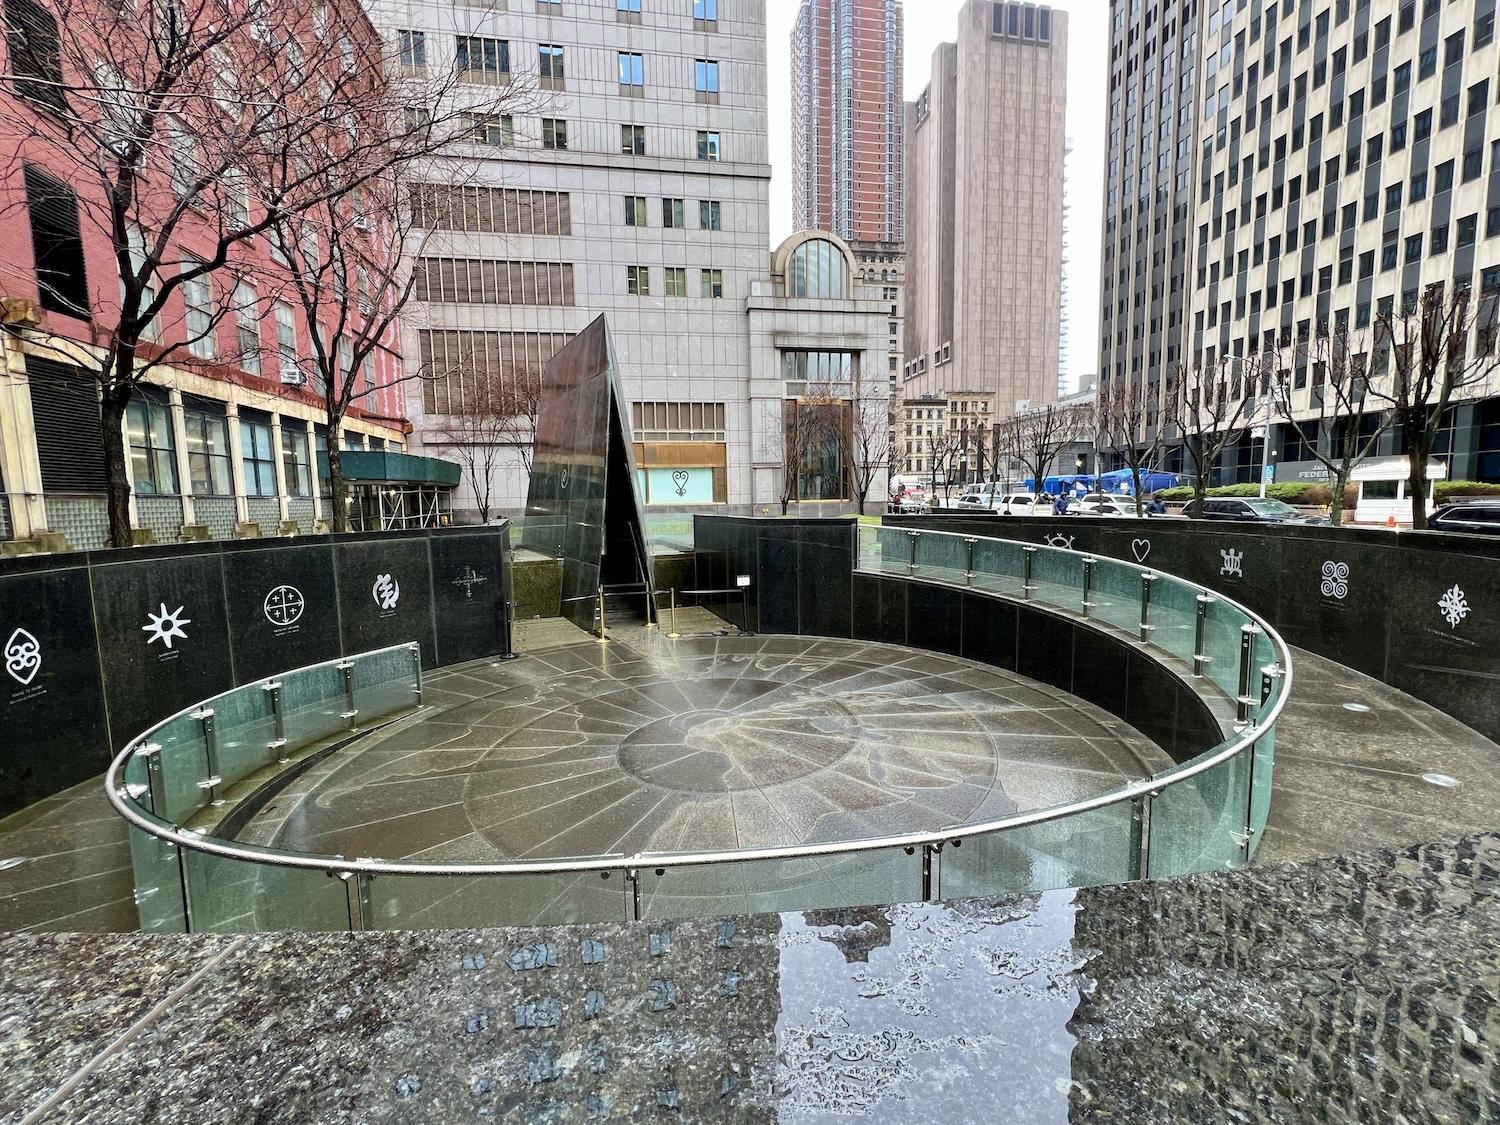 The outdoor portion of African Burial Ground National Monument in Manhattan is outdoors and includes the Ancestral Libation Chamber and the Ancestral Reinterment Ground.